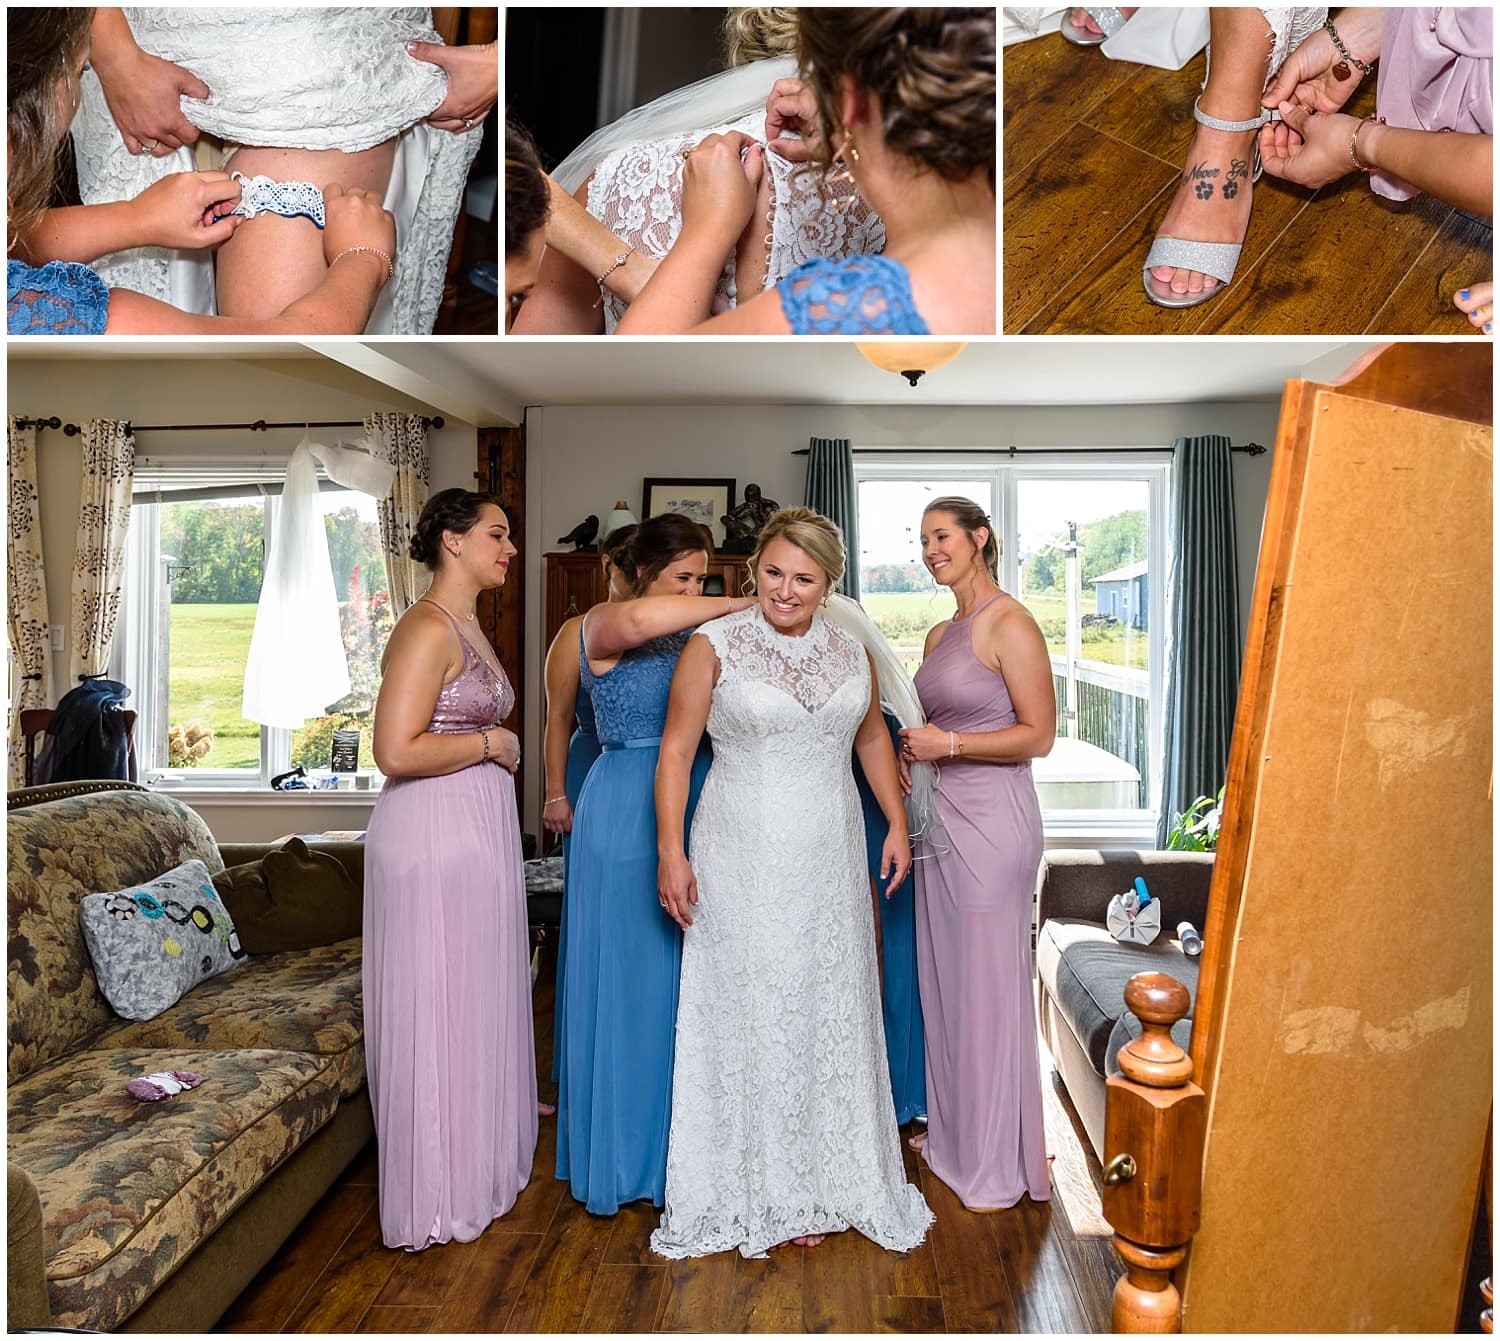 The bride with bridesmaids getting into her wedding dress during her bridal prep at the Barn at Sadie Belle Farm in Hantsport NS.